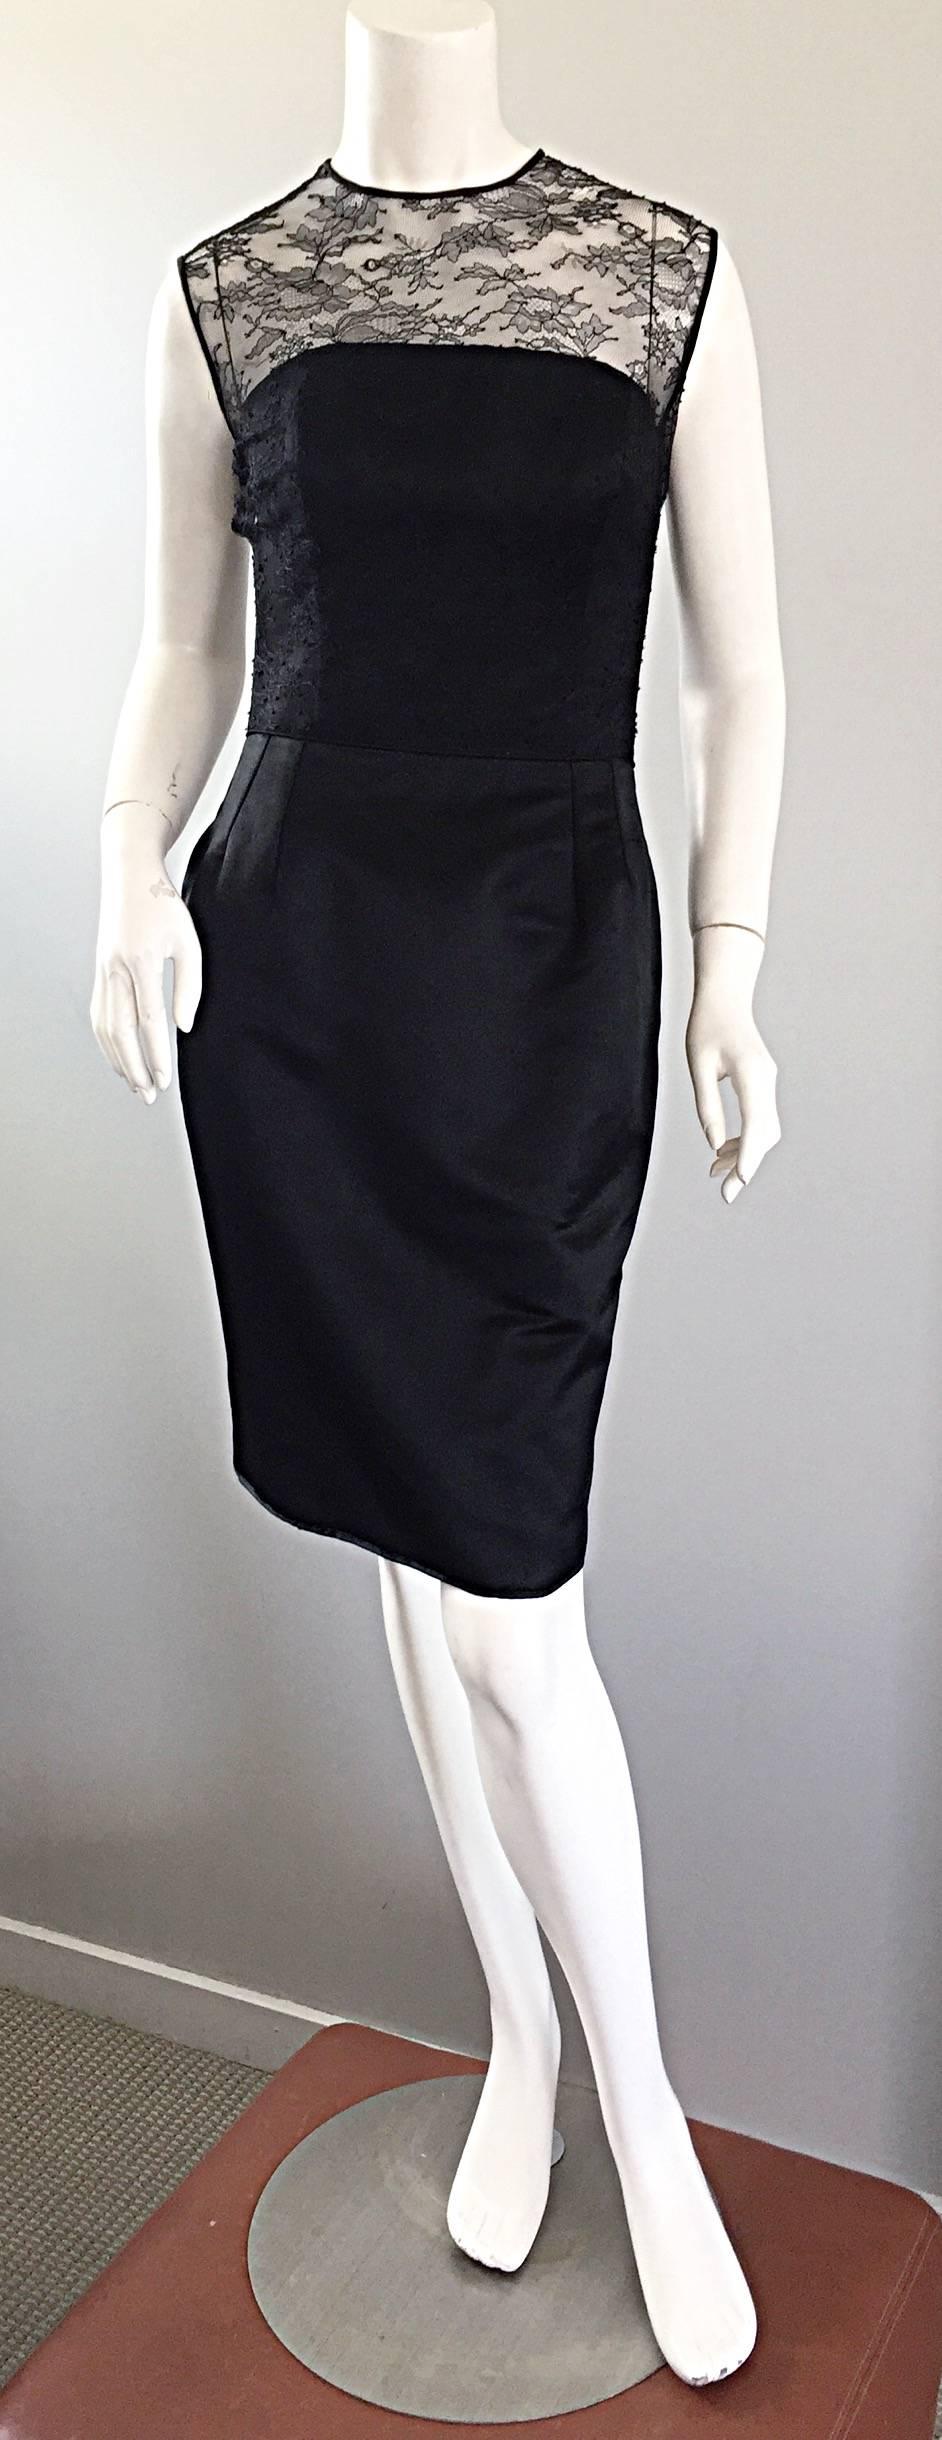 1990s Carlos Marquez Black Silk Vintage 90s Wiggle Dress w/ Lace Overlay LBD For Sale 5